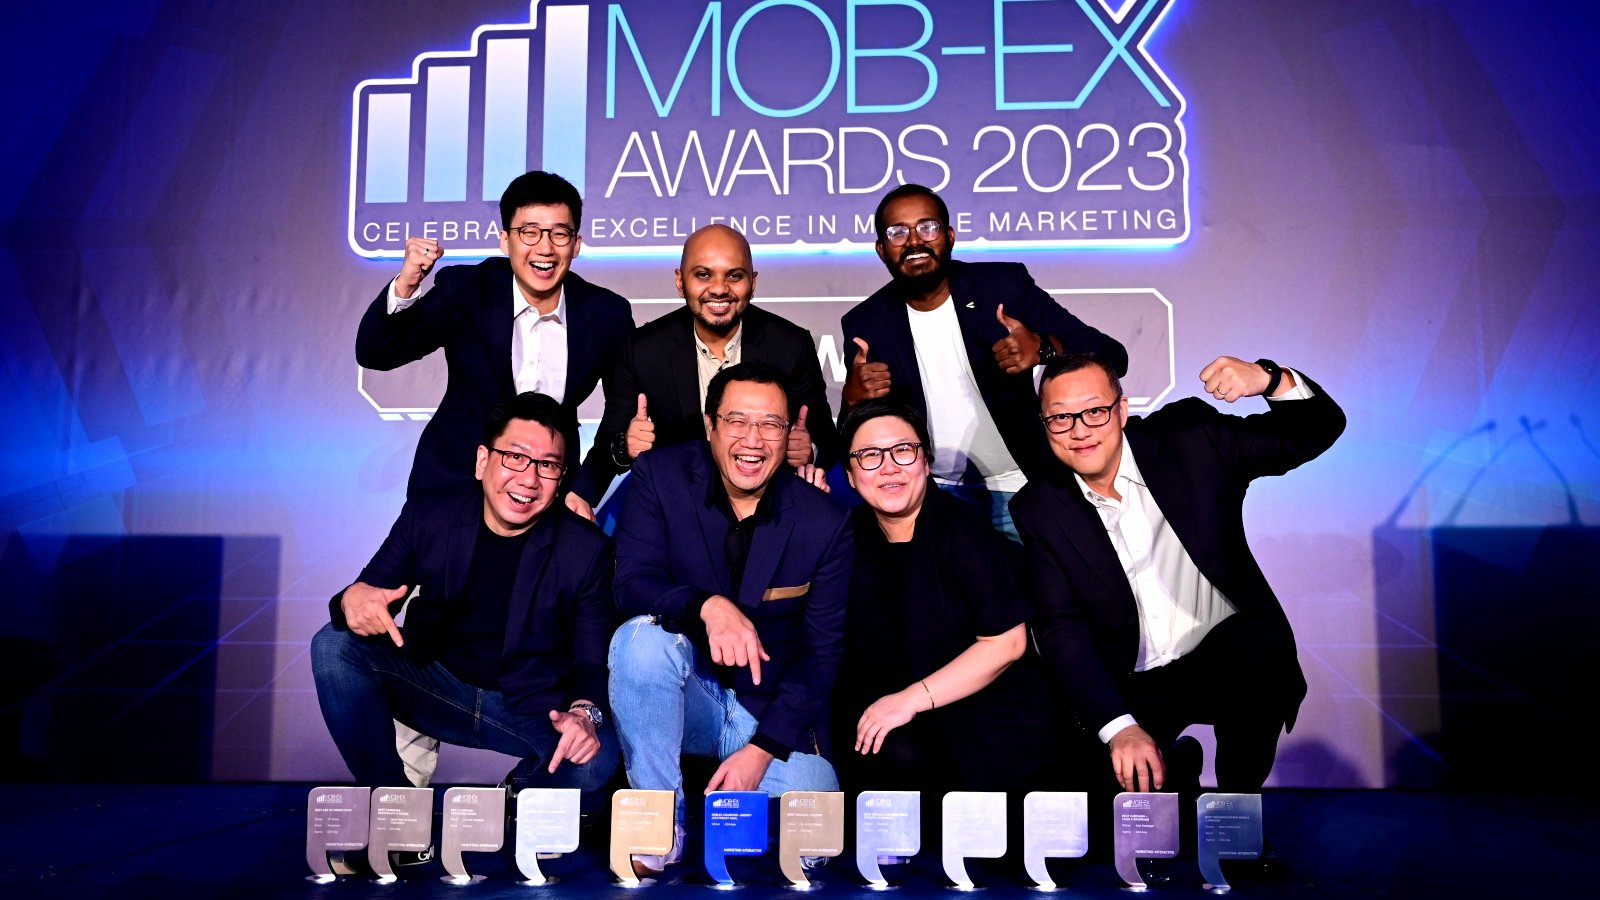 Did you make the shortlist for the Mob-Ex awards 2024?